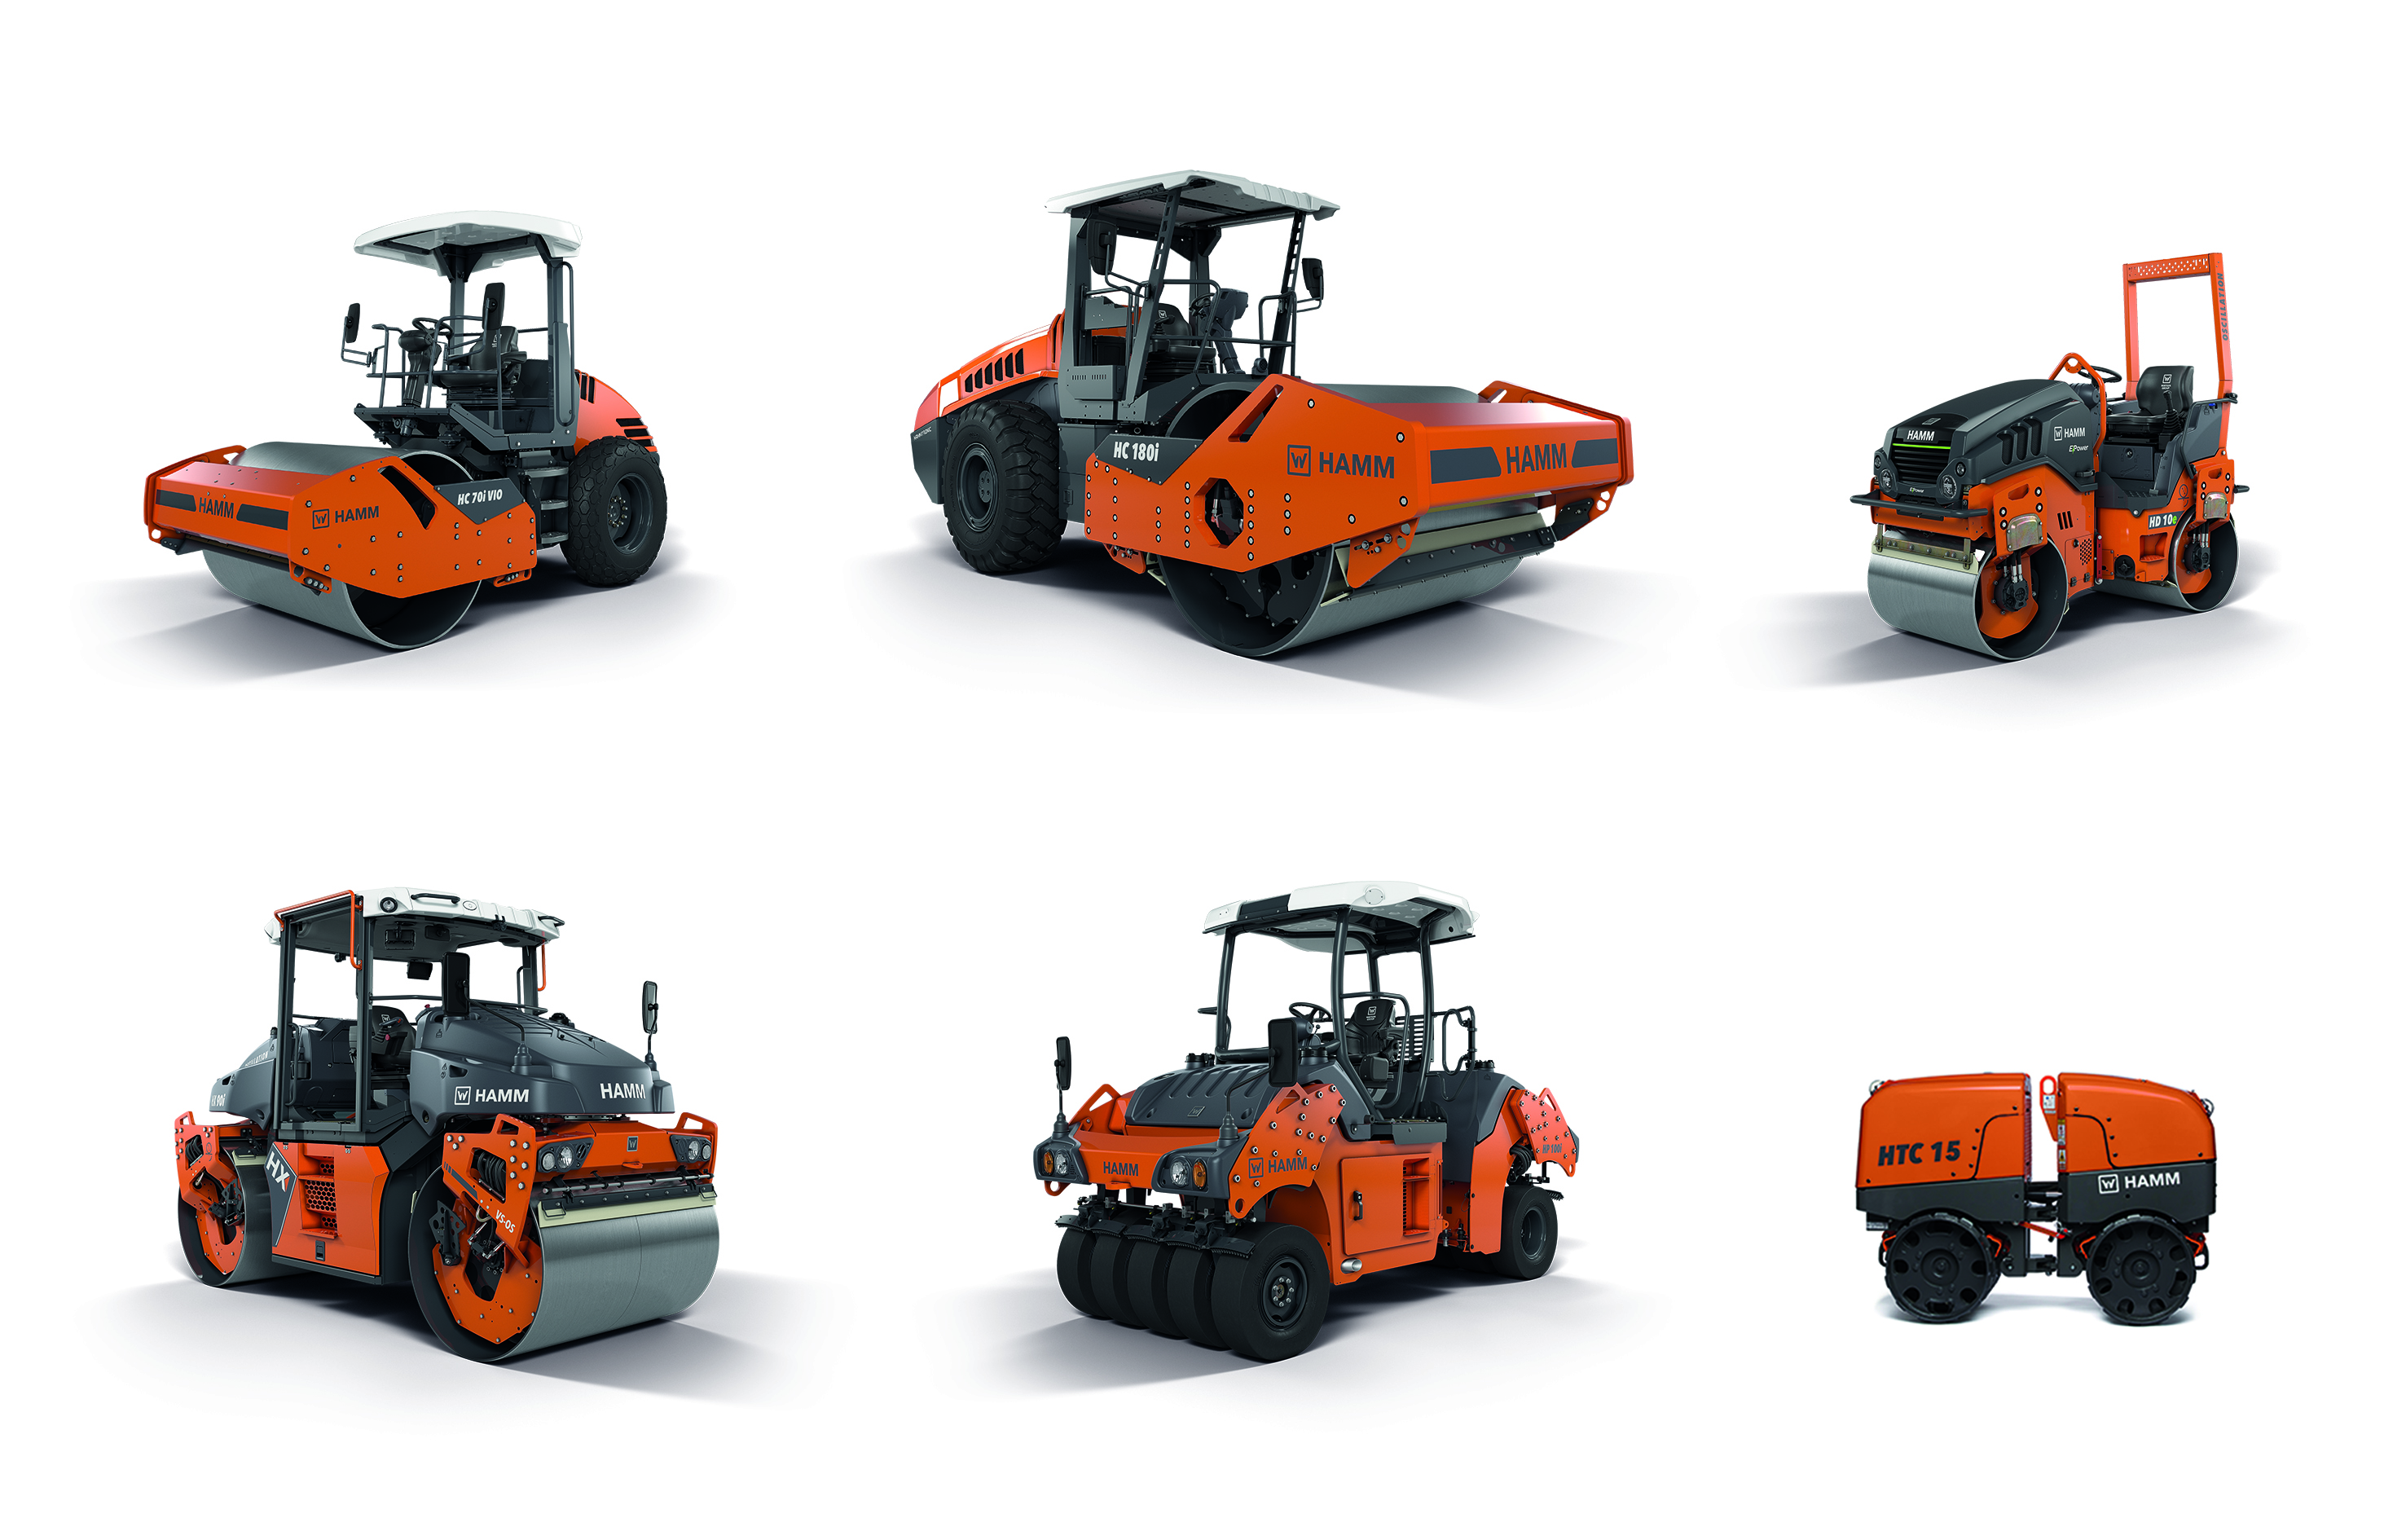 Hamm is presenting numerous new series and models at CONEXPO/CON-AGG 2023: The HC CompactLine series, the HC series, electrically driven compact rollers from the HD CompactLine series, the HX series, the HP 100i articulated pneumatic-tire roller, and the HTC 15 trench roller (from top left to bottom right). They are also presenting a tandem roller from the HD+ series with two VIO drums.